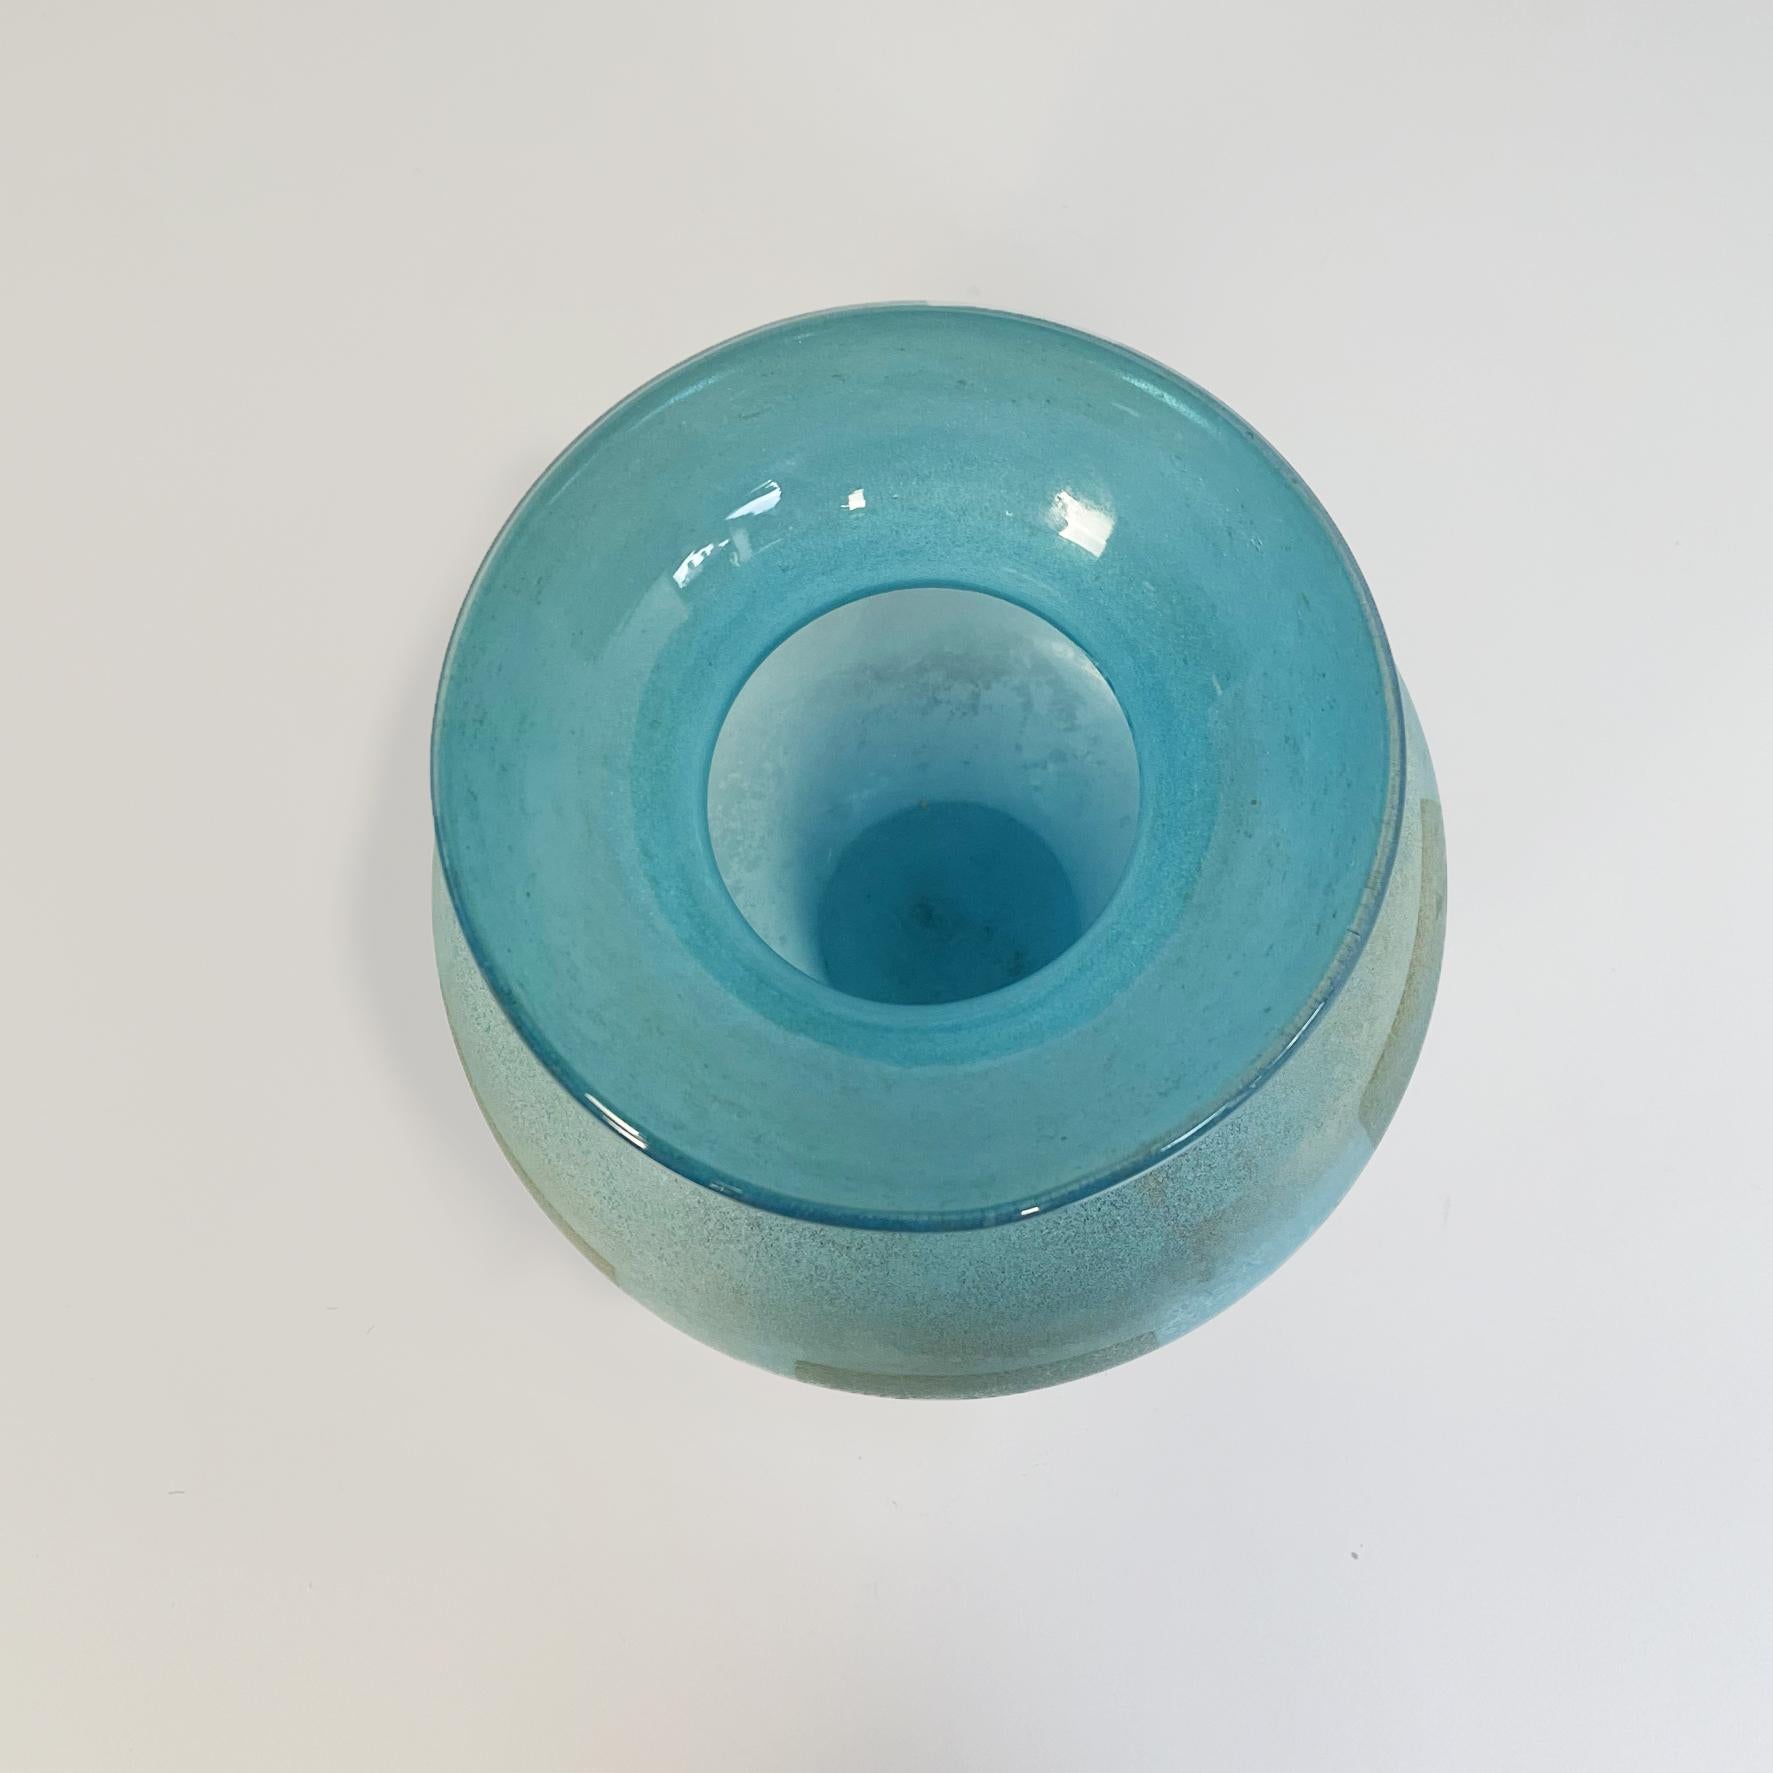 Italian Mid-Century Modern Aquamarine blue glass vase with geometric shapes, 1960s
Round vase in aquamarine blue Murano glass. Glass working excavation. There are geometric shapes to decorate the vase.
1960s.
Very good conditions.
Measurements in cm